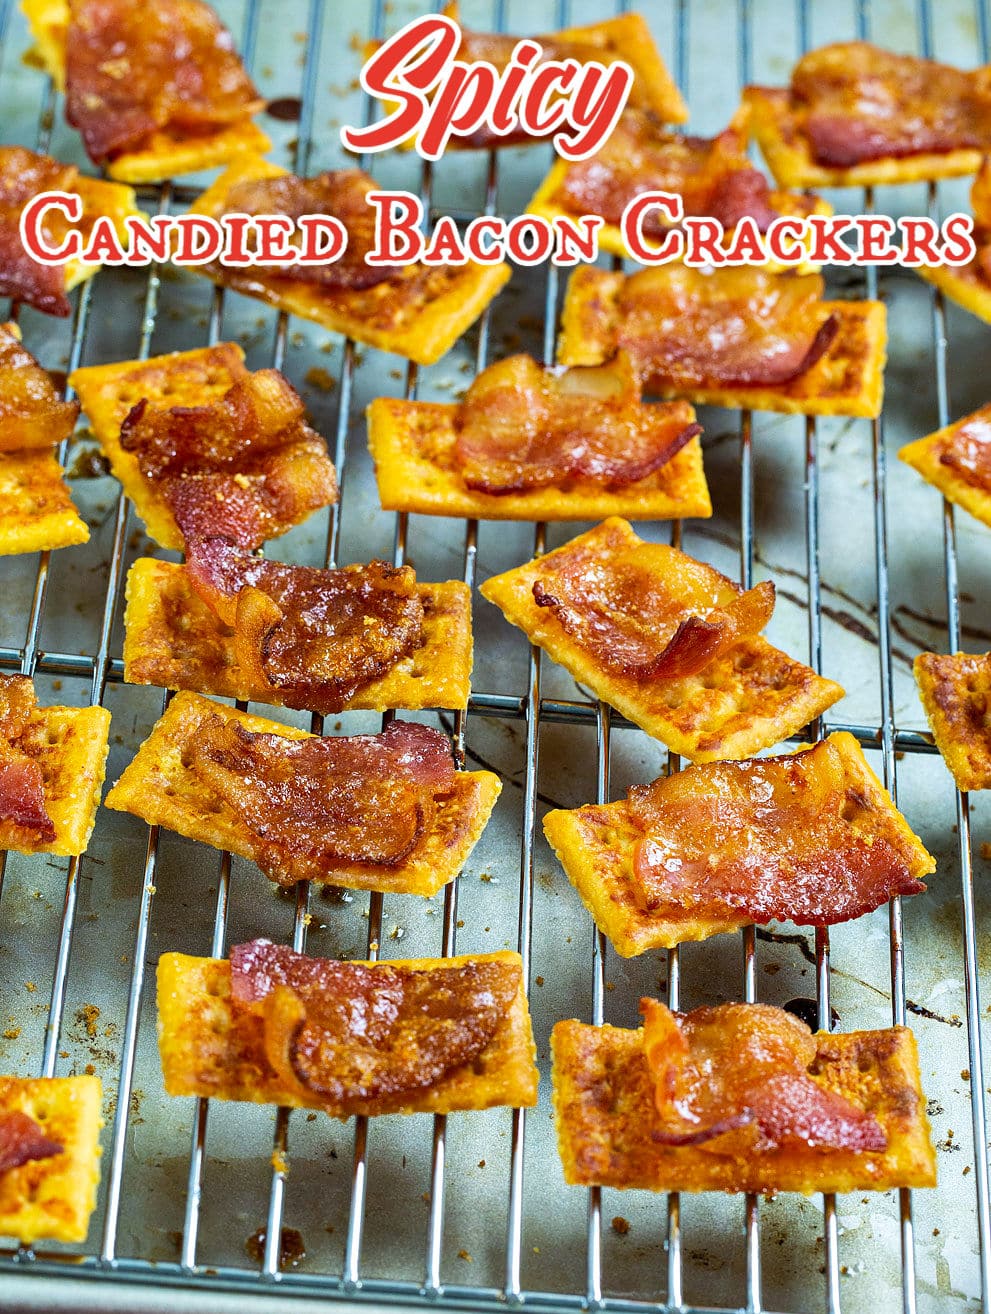 Spicy Candied Bacon Crackers on wire rack.